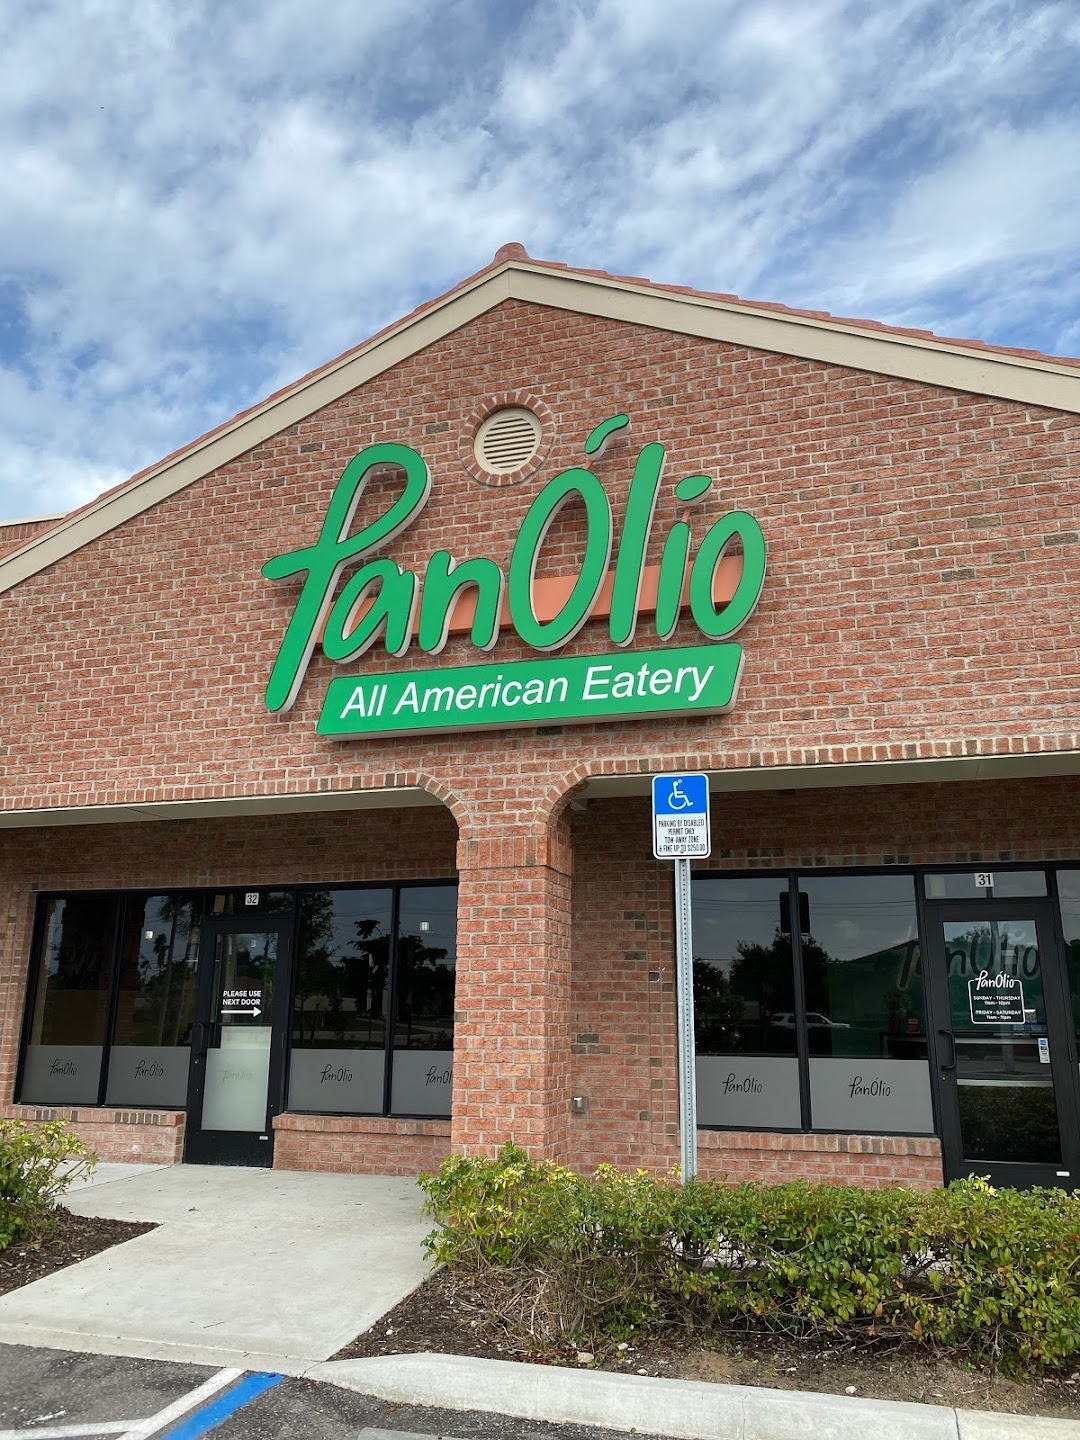 PanOlio, All American Eatery